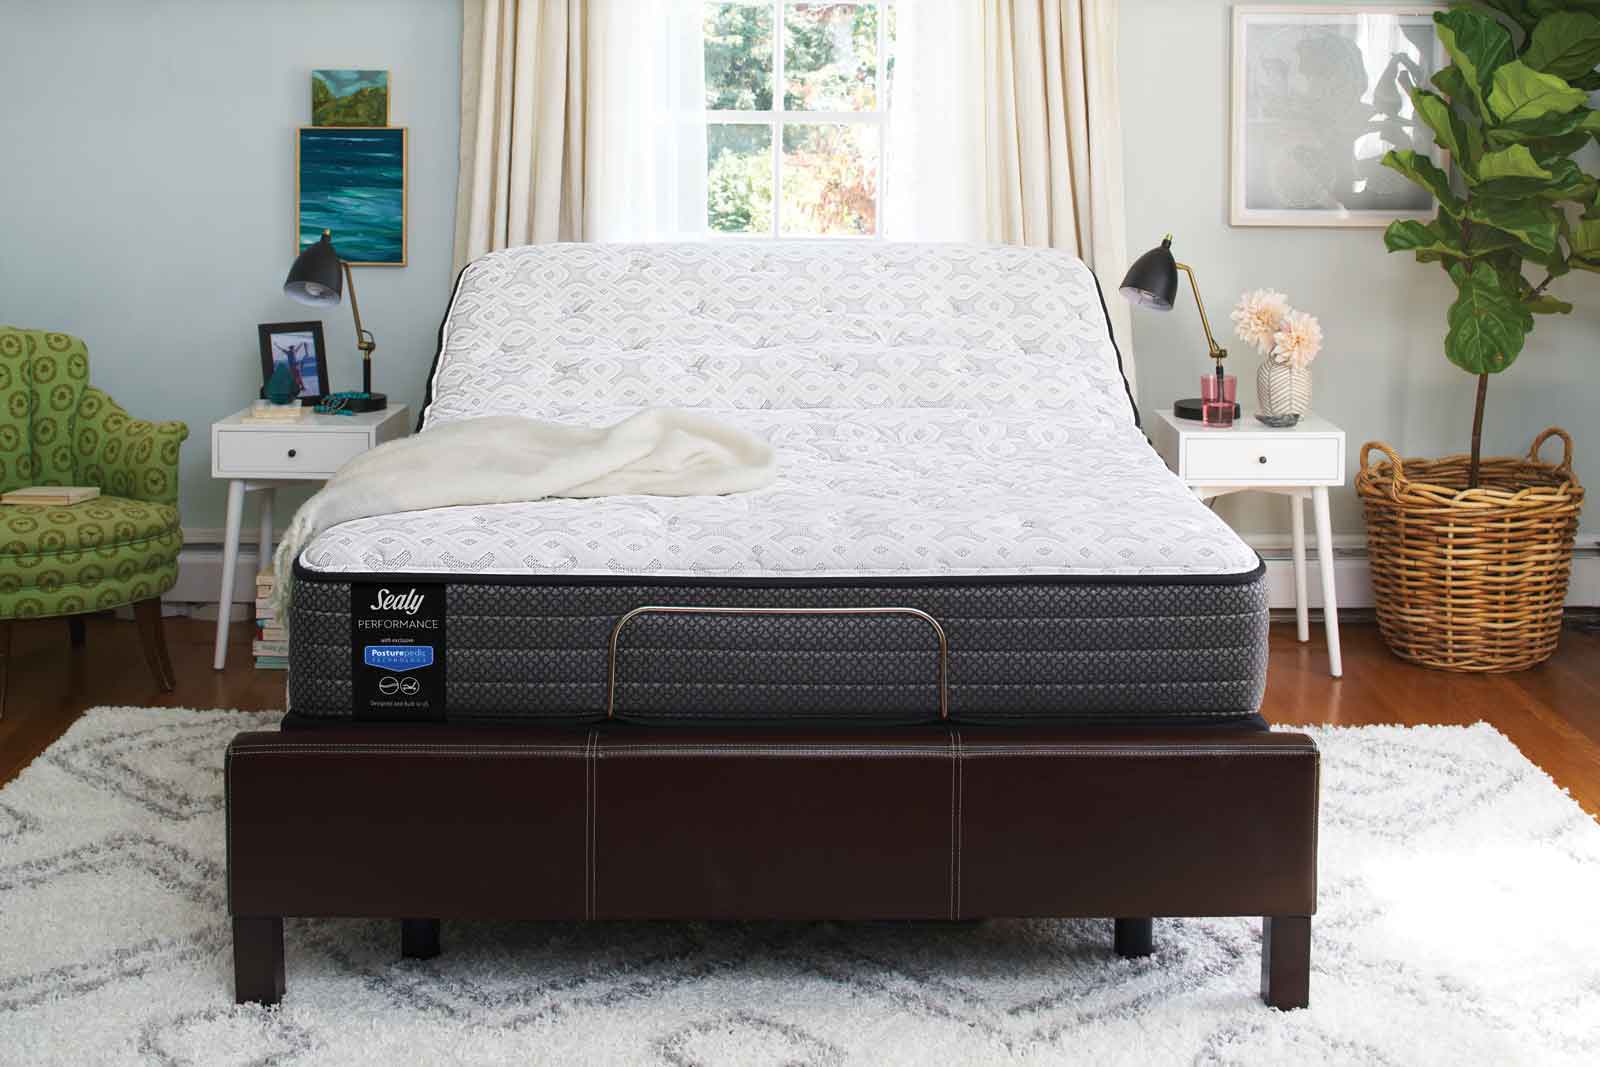 What Are The Pros & Cons For Adjustable Bed Bases?